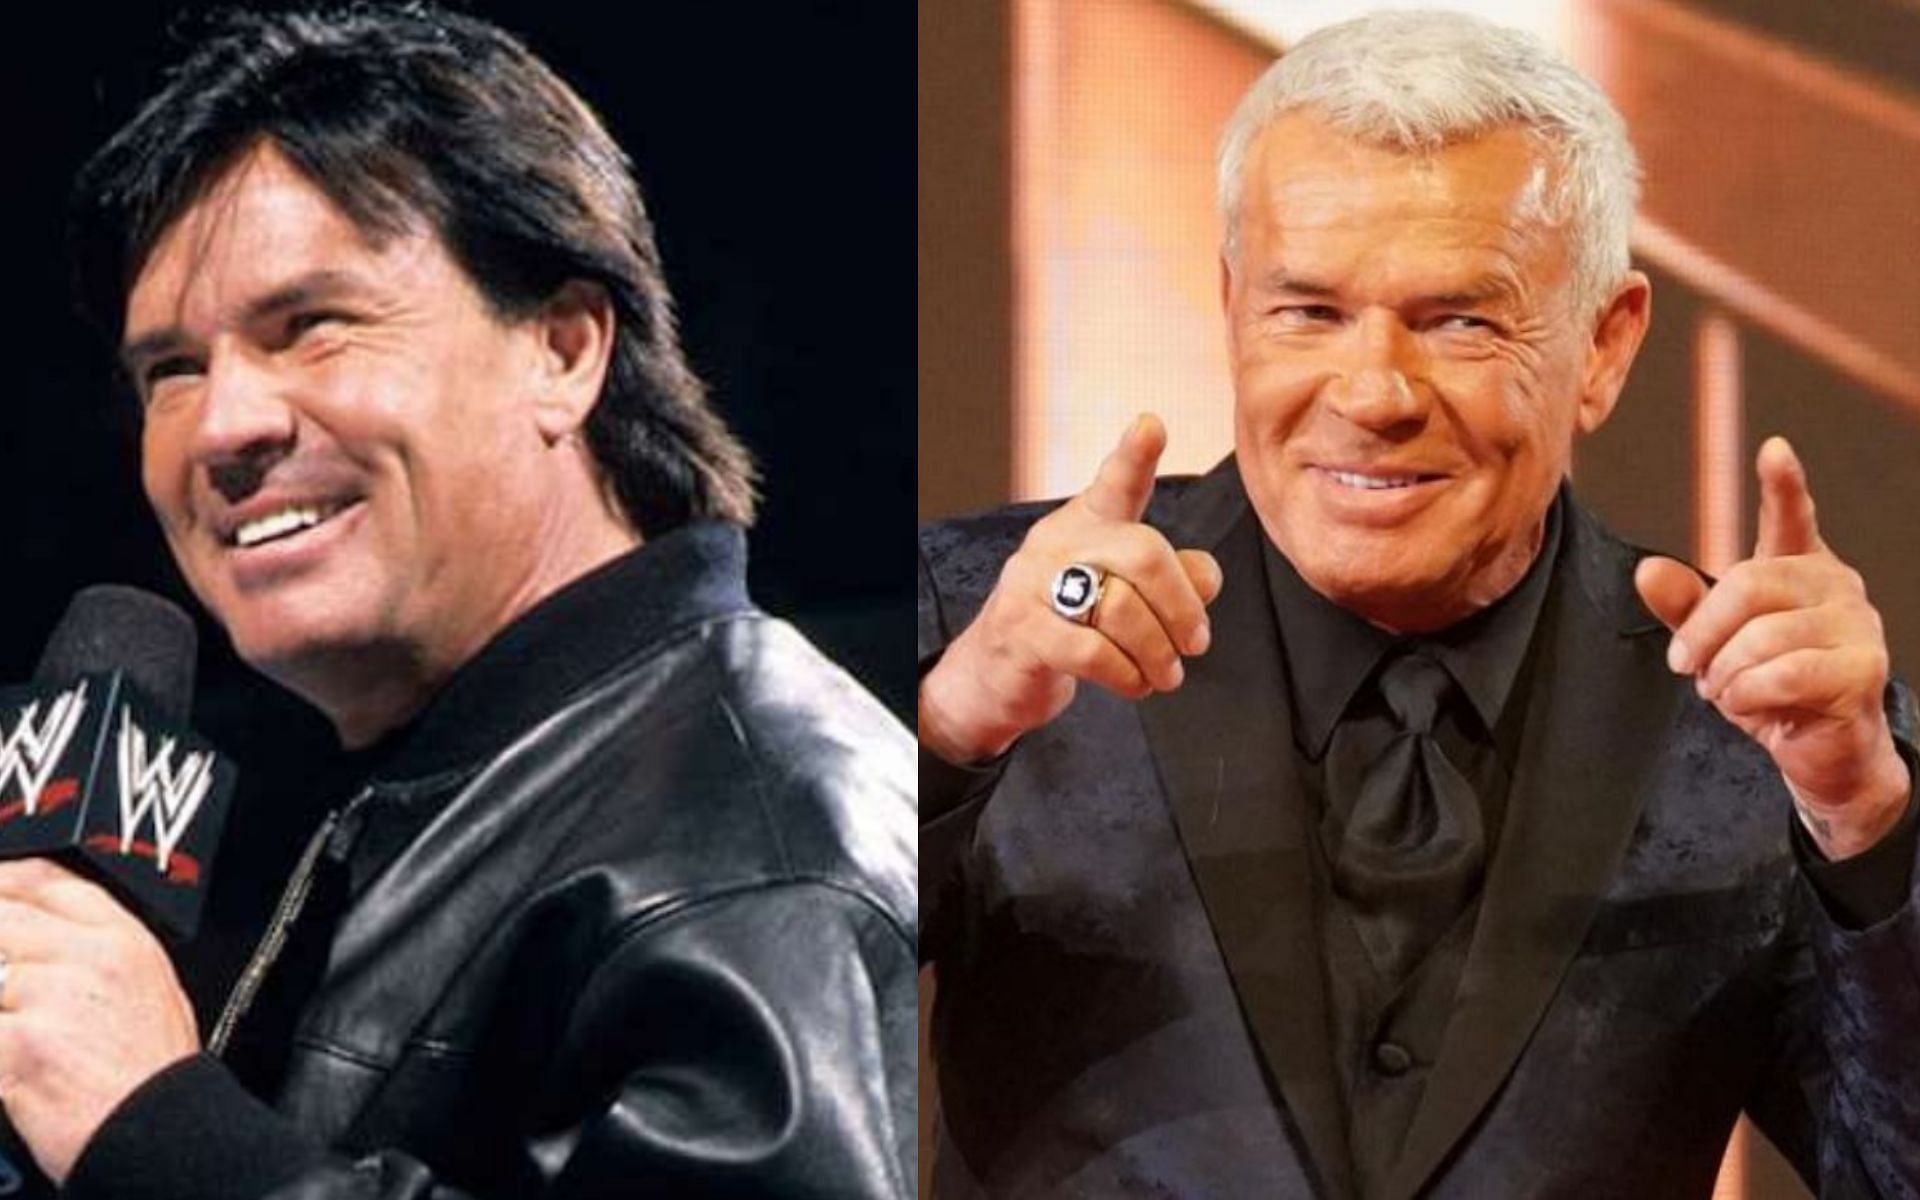 Eric Bischoff portrayed the role of a heelish general manager of RAW in the early 2000s